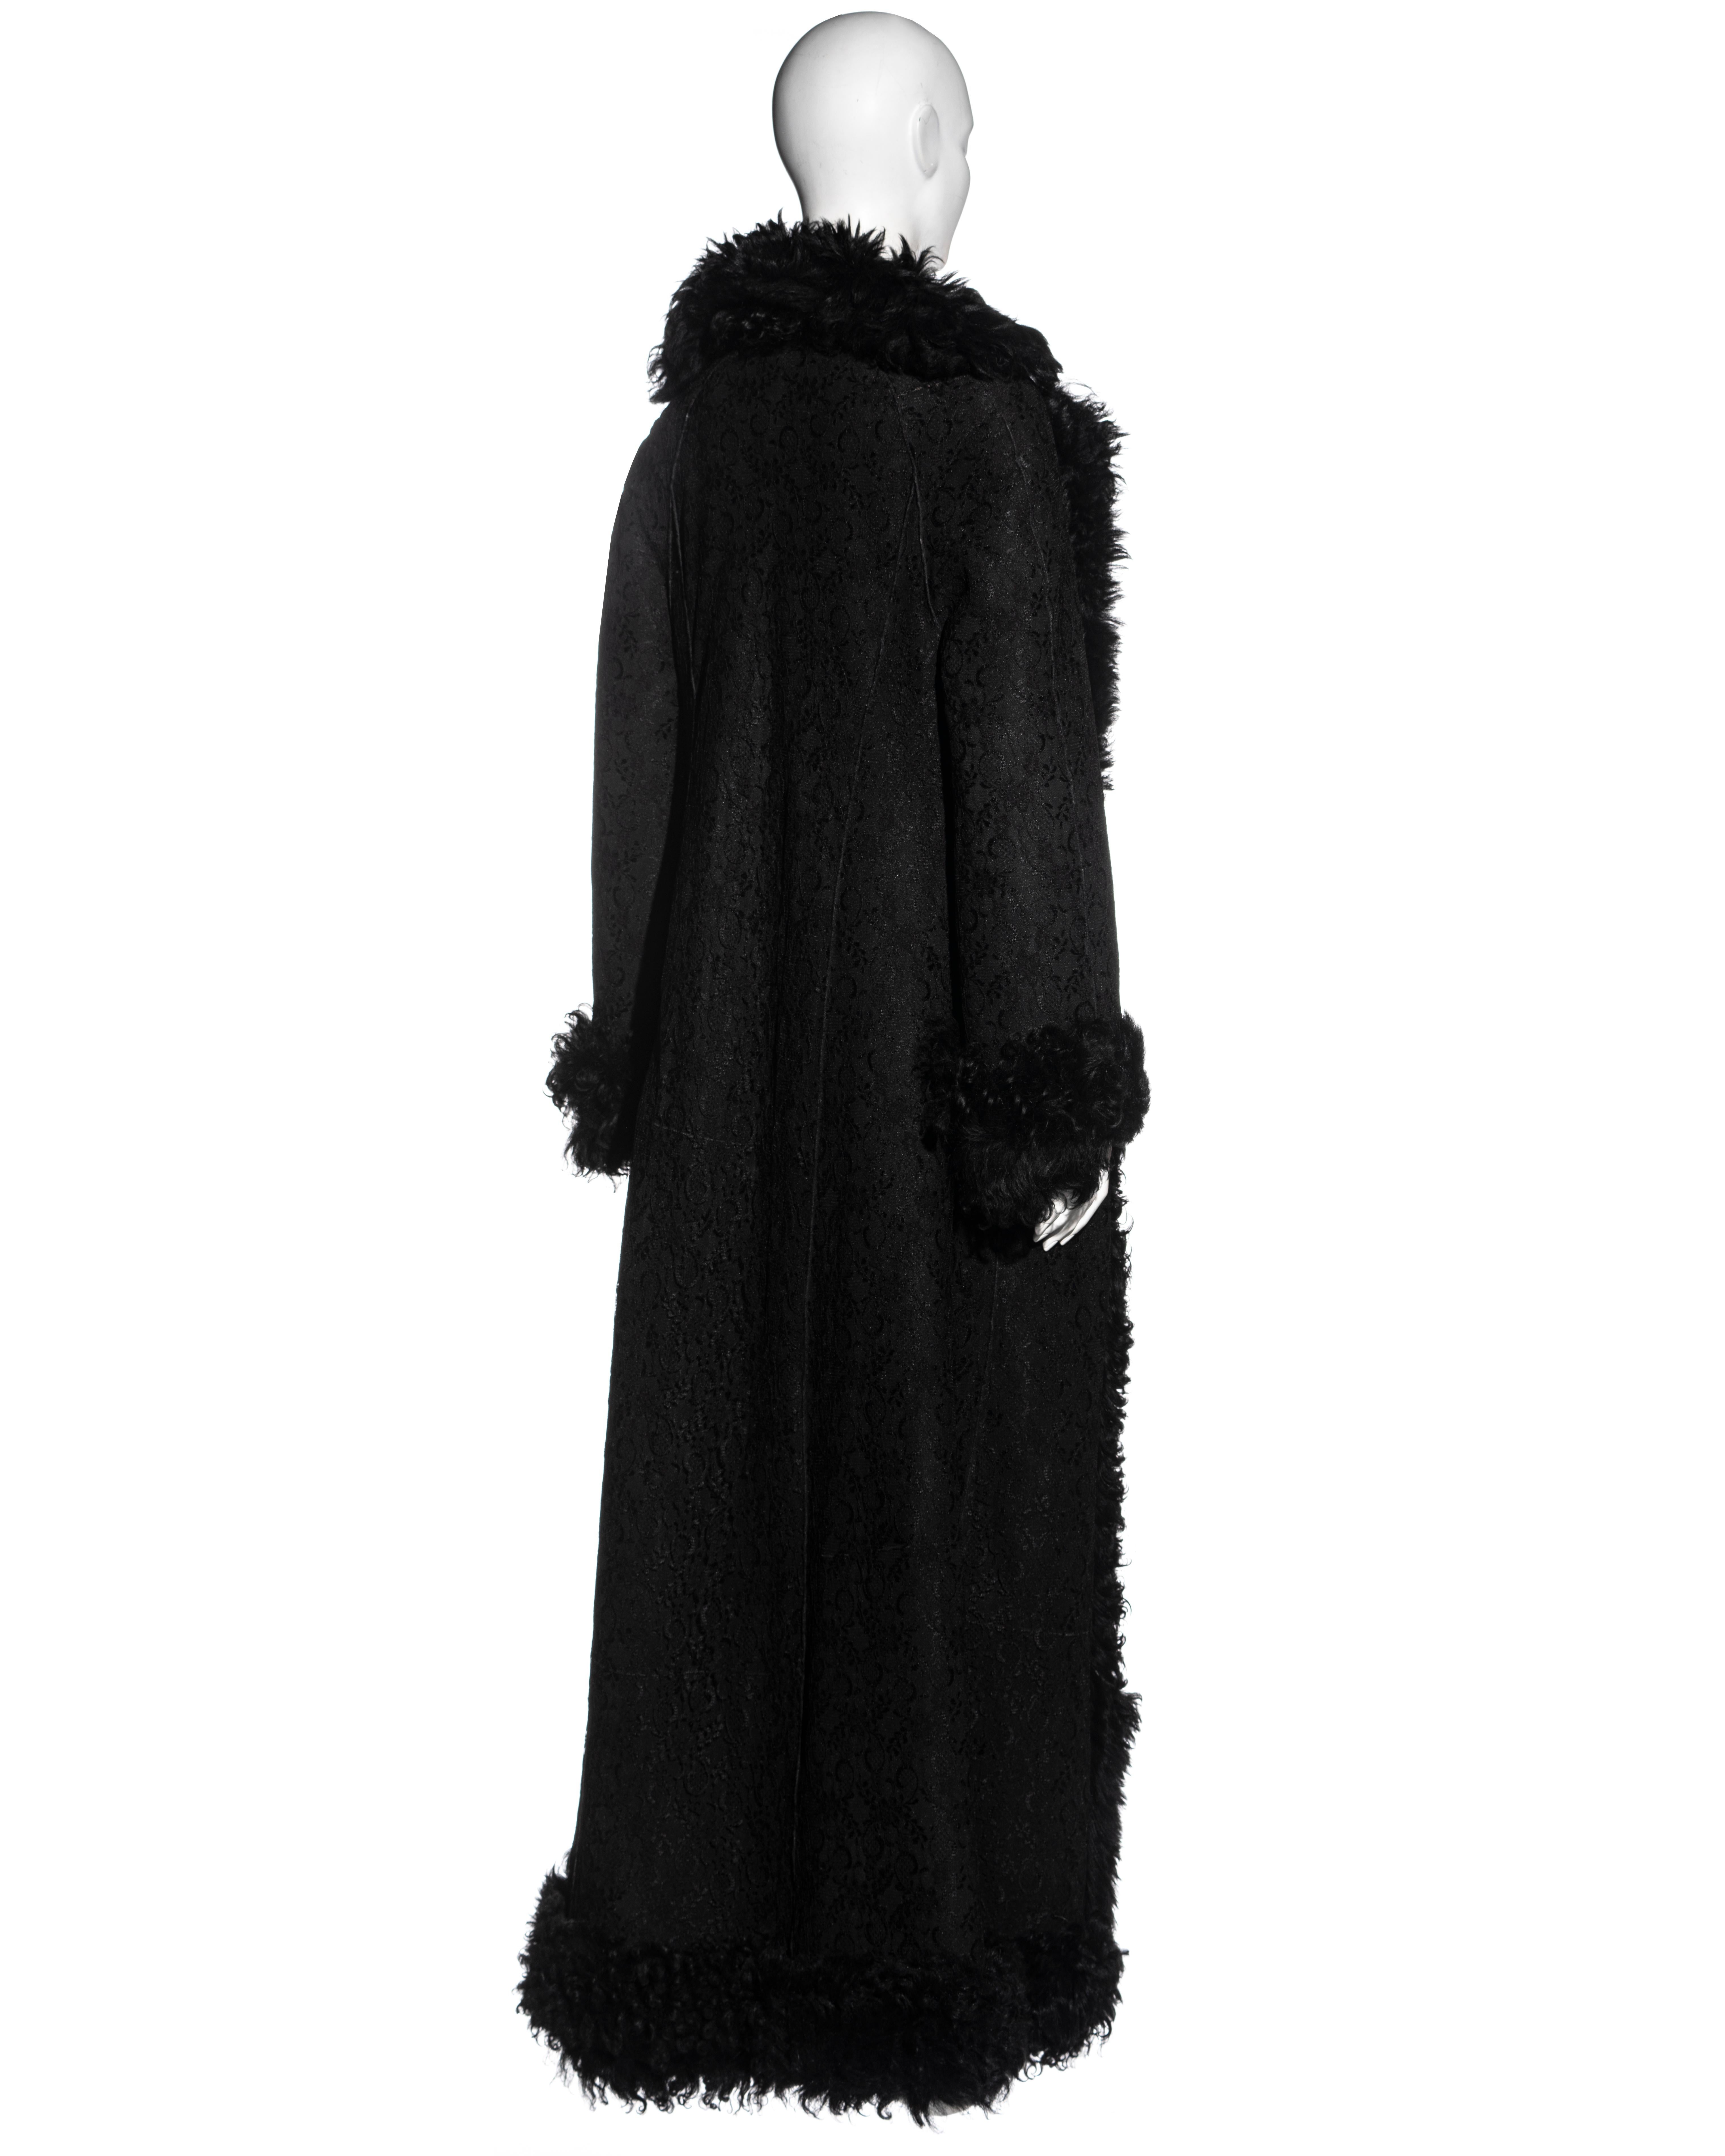 Women's Christian Dior by John Galliano black full length lamb and lace coat, fw 2001 For Sale